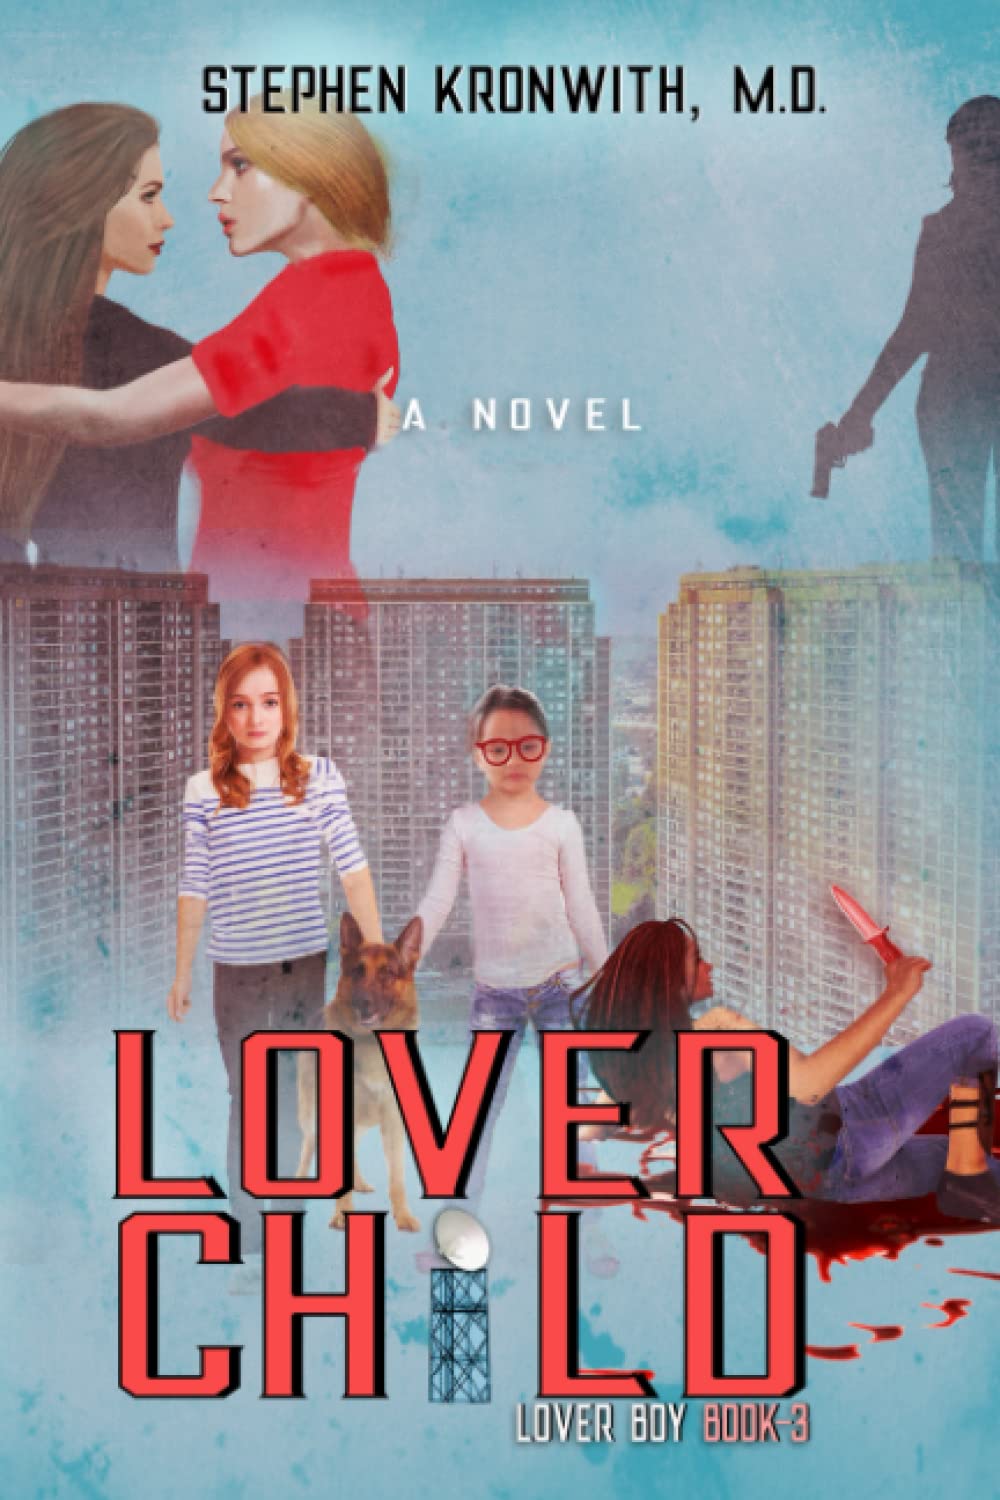 Lover Child by Stephen Kronwith, M.D.